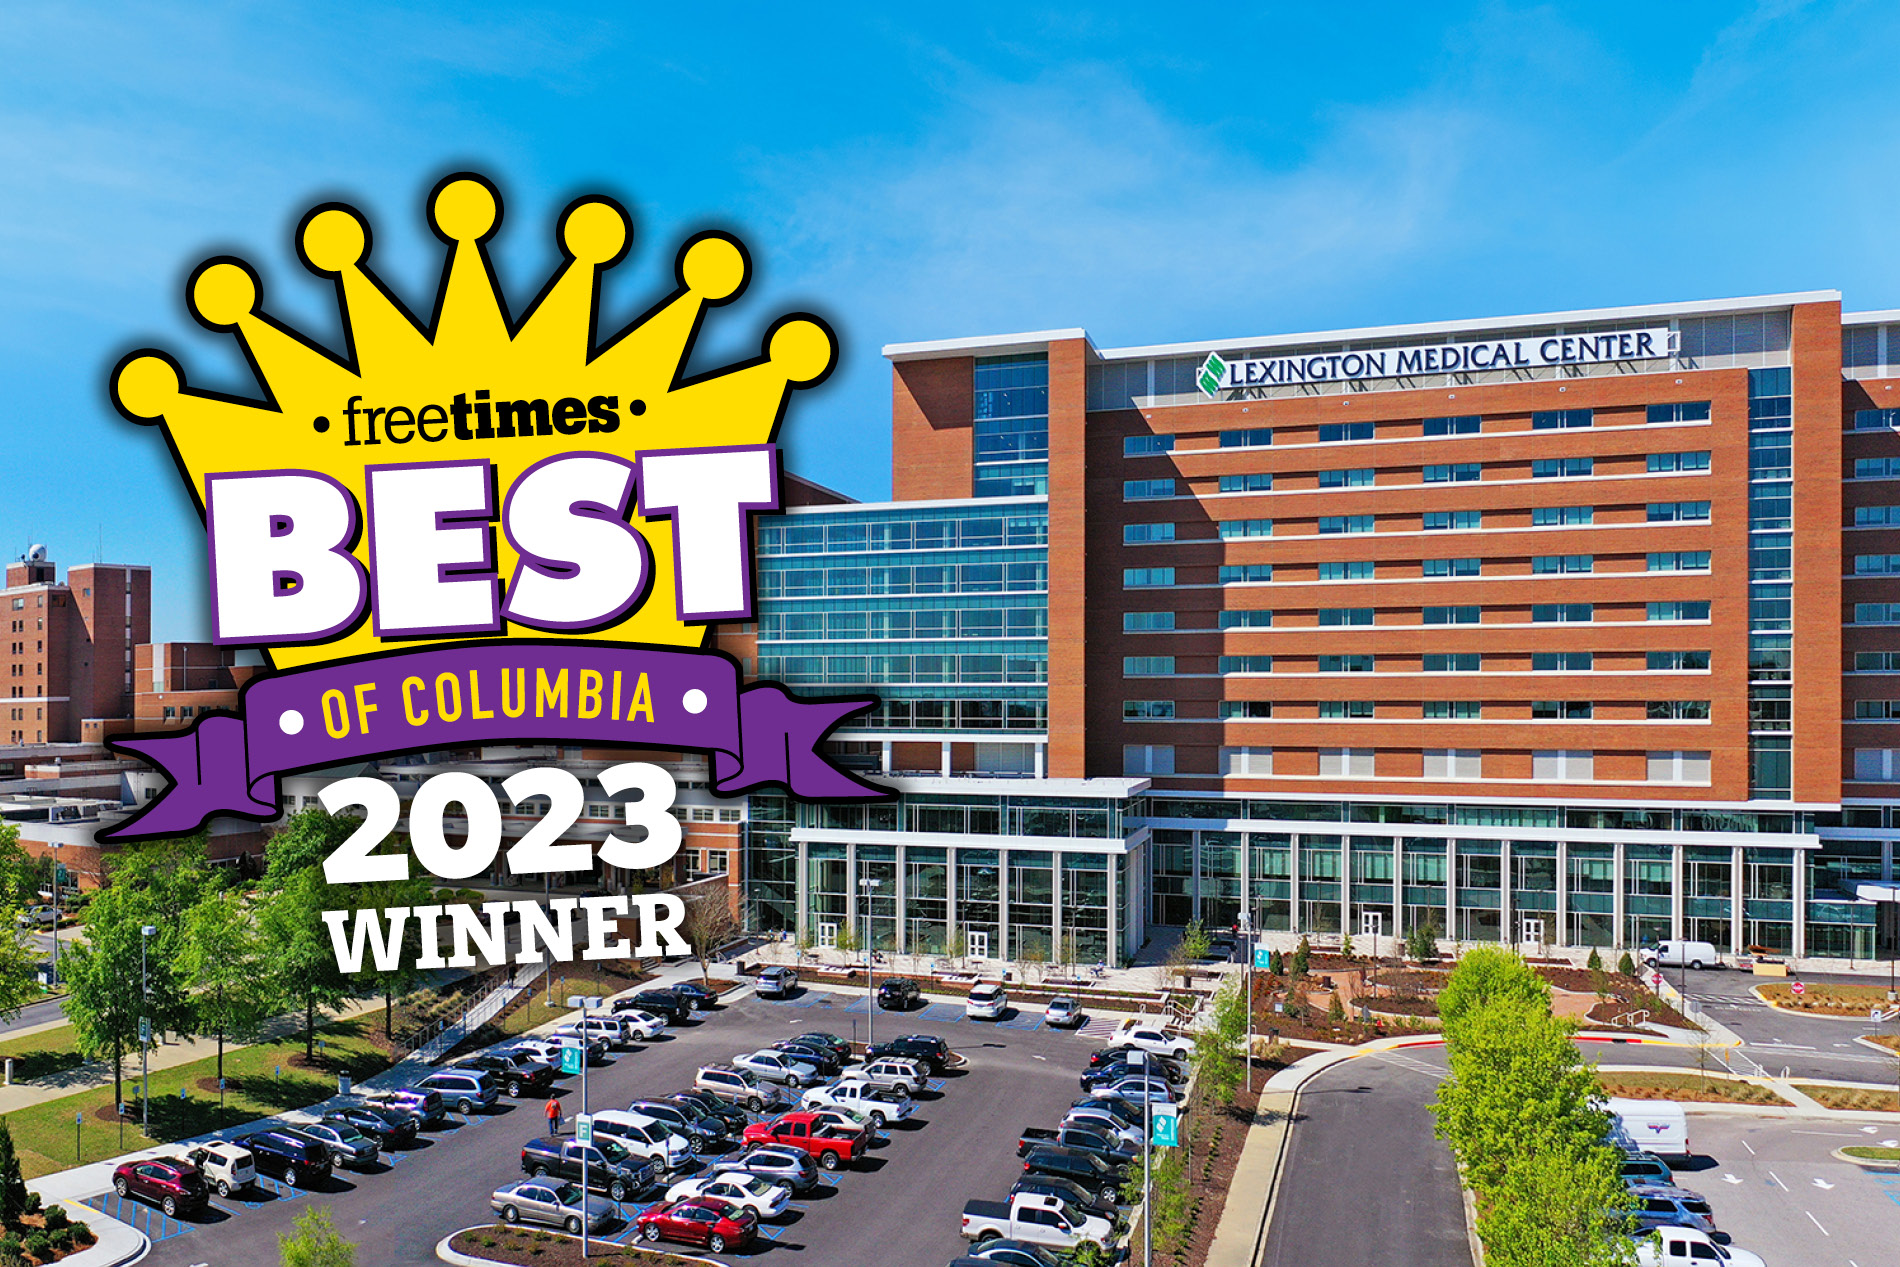 Aerial photo of Lexington Medical Center with Free Times "Best of Columbia" seal